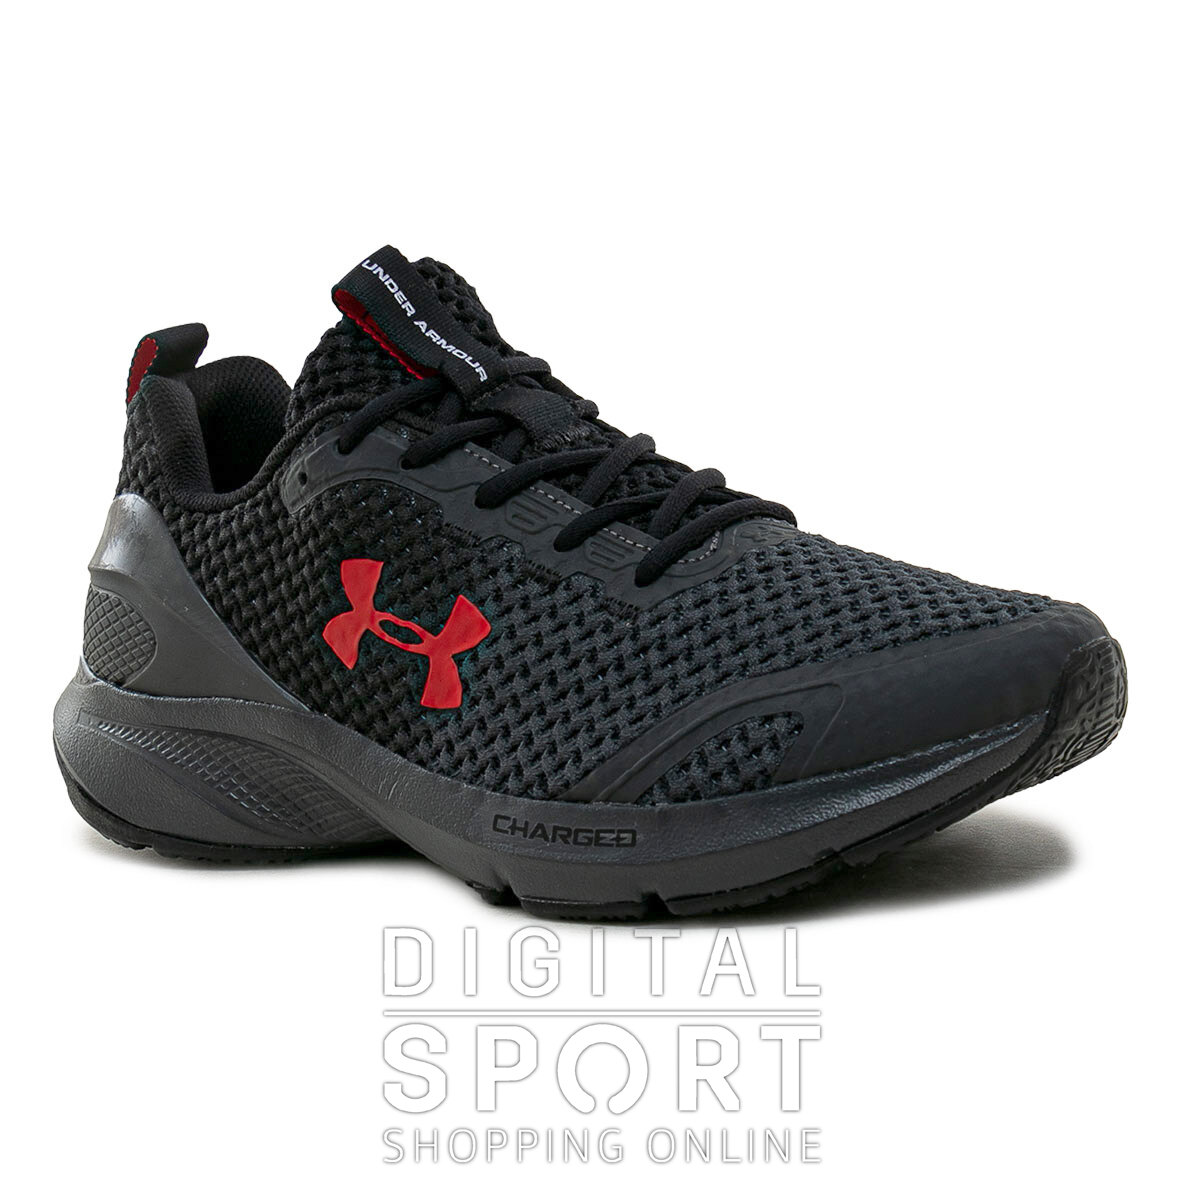 ZAPATILLAS CHARGED PROMPT UNDER ARMOUR